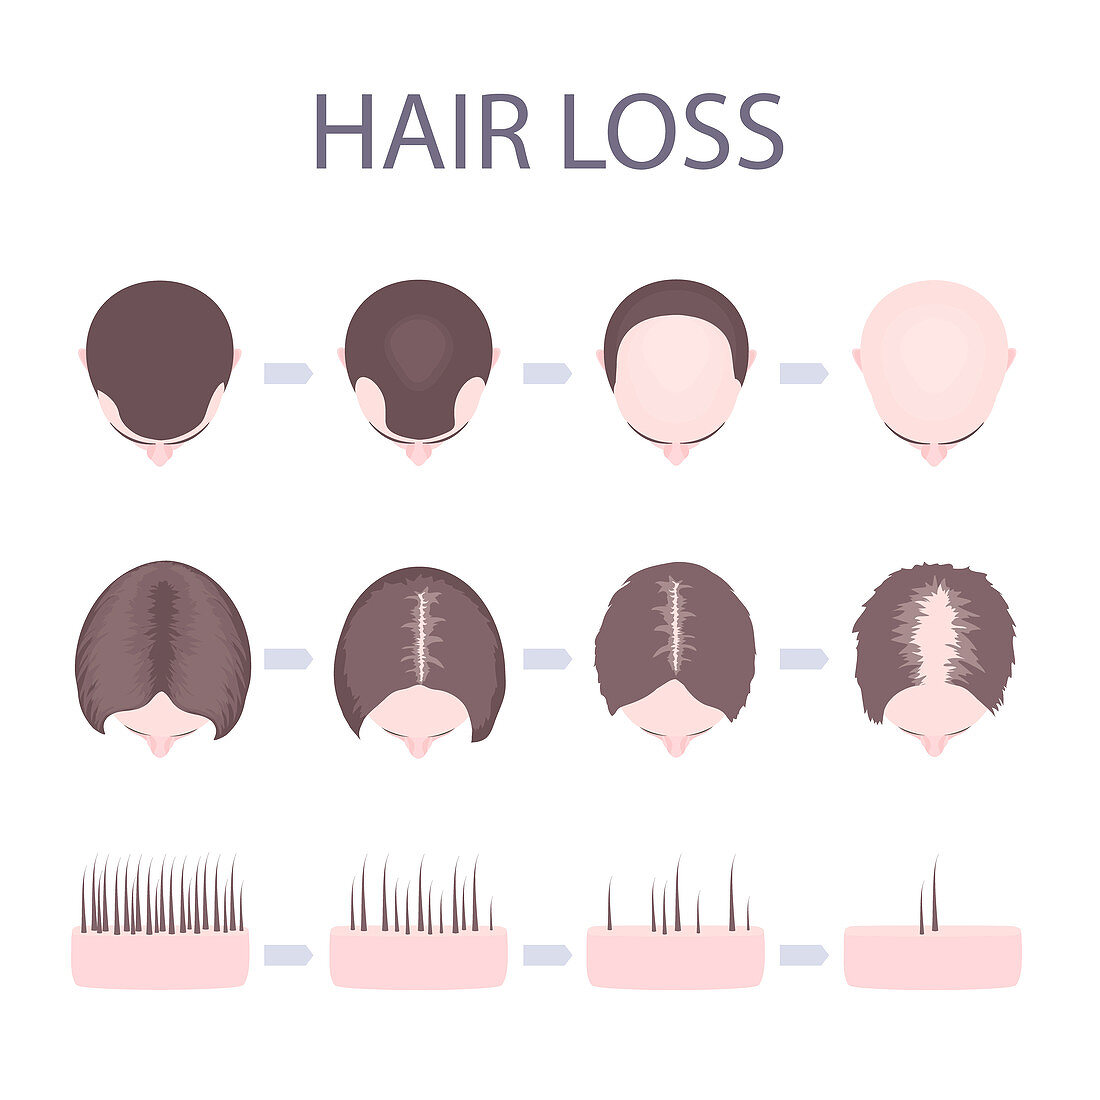 Male and female hair loss stages, illustration